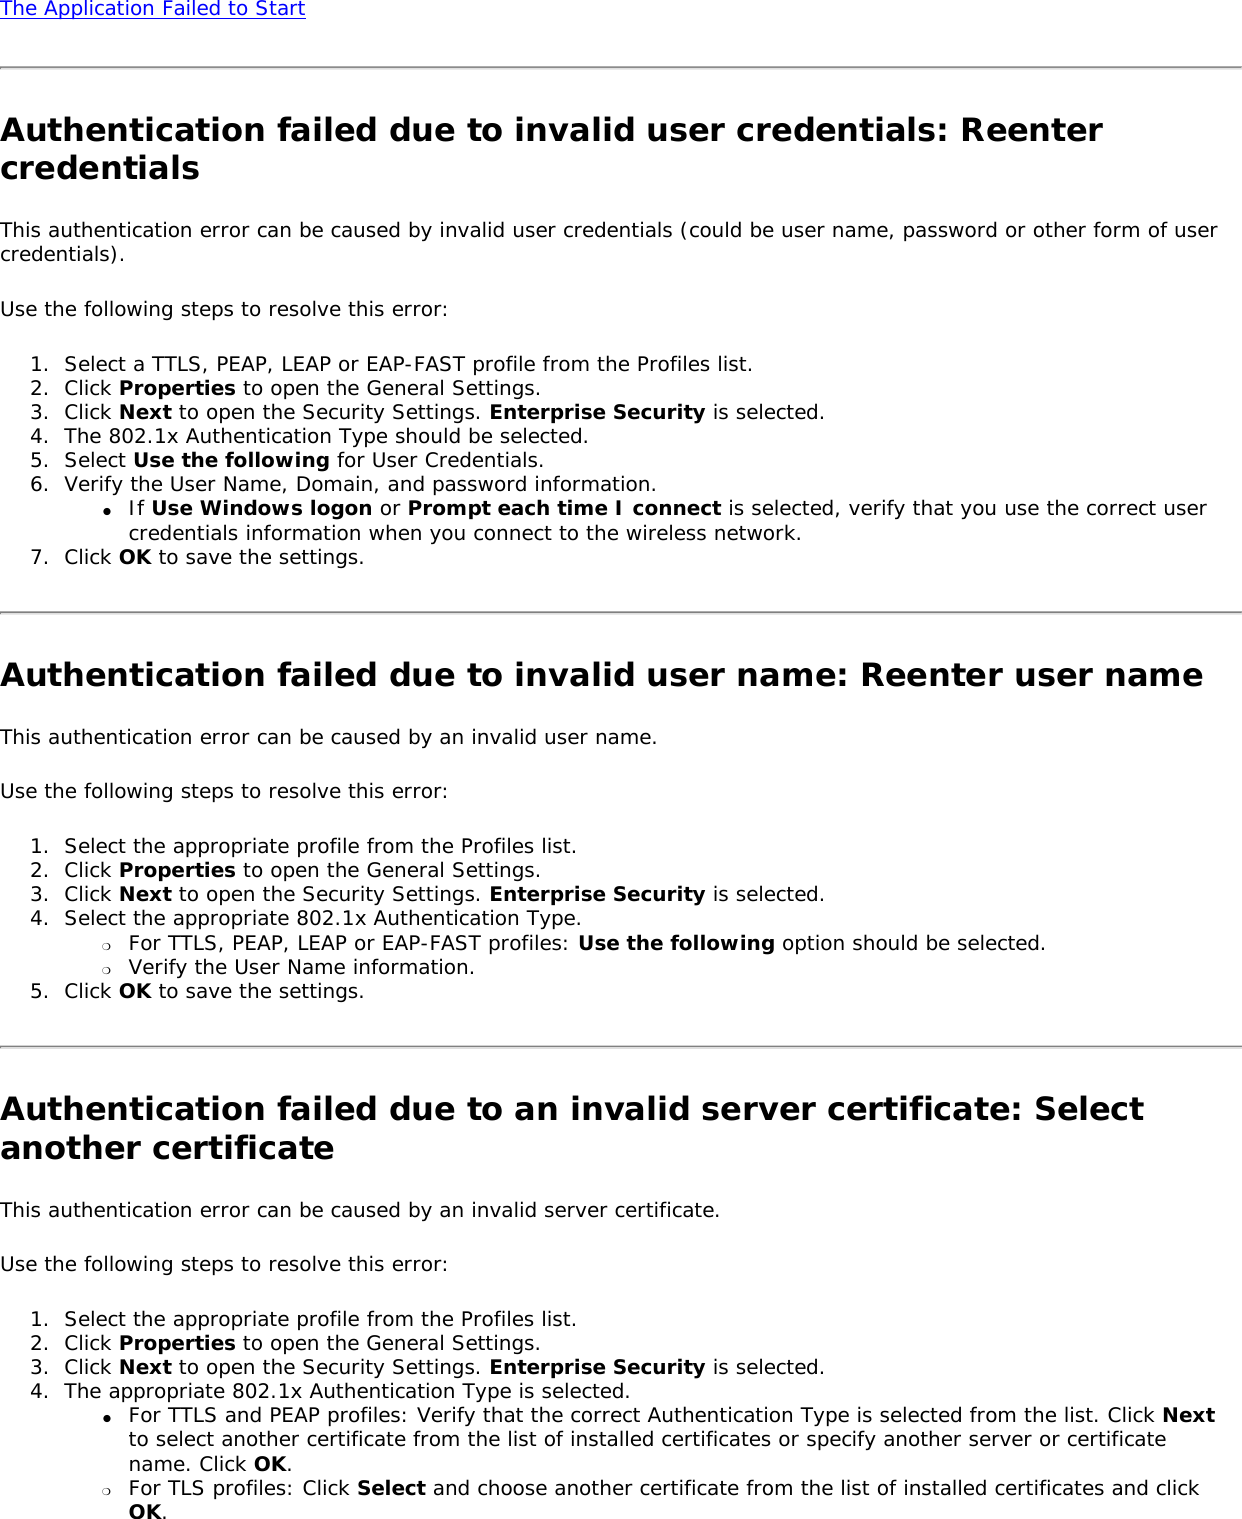 The Application Failed to Start Authentication failed due to invalid user credentials: Reenter credentialsThis authentication error can be caused by invalid user credentials (could be user name, password or other form of user credentials). Use the following steps to resolve this error: 1.  Select a TTLS, PEAP, LEAP or EAP-FAST profile from the Profiles list. 2.  Click Properties to open the General Settings. 3.  Click Next to open the Security Settings. Enterprise Security is selected. 4.  The 802.1x Authentication Type should be selected.5.  Select Use the following for User Credentials.6.  Verify the User Name, Domain, and password information.●     If Use Windows logon or Prompt each time I connect is selected, verify that you use the correct user credentials information when you connect to the wireless network.7.  Click OK to save the settings. Authentication failed due to invalid user name: Reenter user nameThis authentication error can be caused by an invalid user name.    Use the following steps to resolve this error: 1.  Select the appropriate profile from the Profiles list. 2.  Click Properties to open the General Settings.3.  Click Next to open the Security Settings. Enterprise Security is selected. 4.  Select the appropriate 802.1x Authentication Type.❍     For TTLS, PEAP, LEAP or EAP-FAST profiles: Use the following option should be selected. ❍     Verify the User Name information.5.  Click OK to save the settings. Authentication failed due to an invalid server certificate: Select another certificate This authentication error can be caused by an invalid server certificate. Use the following steps to resolve this error: 1.  Select the appropriate profile from the Profiles list. 2.  Click Properties to open the General Settings.3.  Click Next to open the Security Settings. Enterprise Security is selected. 4.  The appropriate 802.1x Authentication Type is selected. ●     For TTLS and PEAP profiles: Verify that the correct Authentication Type is selected from the list. Click Next to select another certificate from the list of installed certificates or specify another server or certificate name. Click OK. ❍     For TLS profiles: Click Select and choose another certificate from the list of installed certificates and click OK.